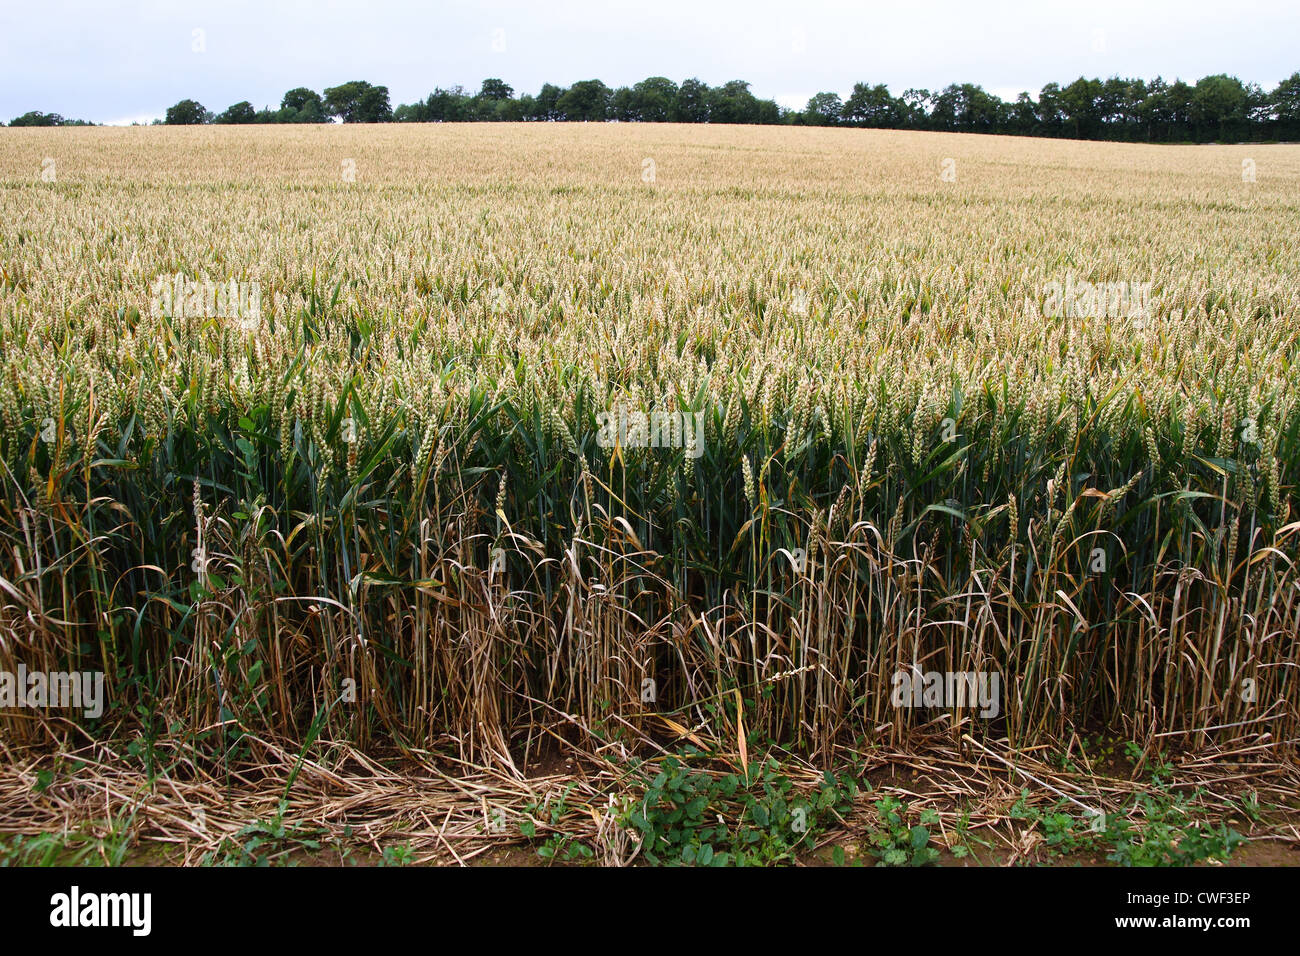 Wheat harvest late summer mainly green wheat stalks with ripening seed heads Stock Photo